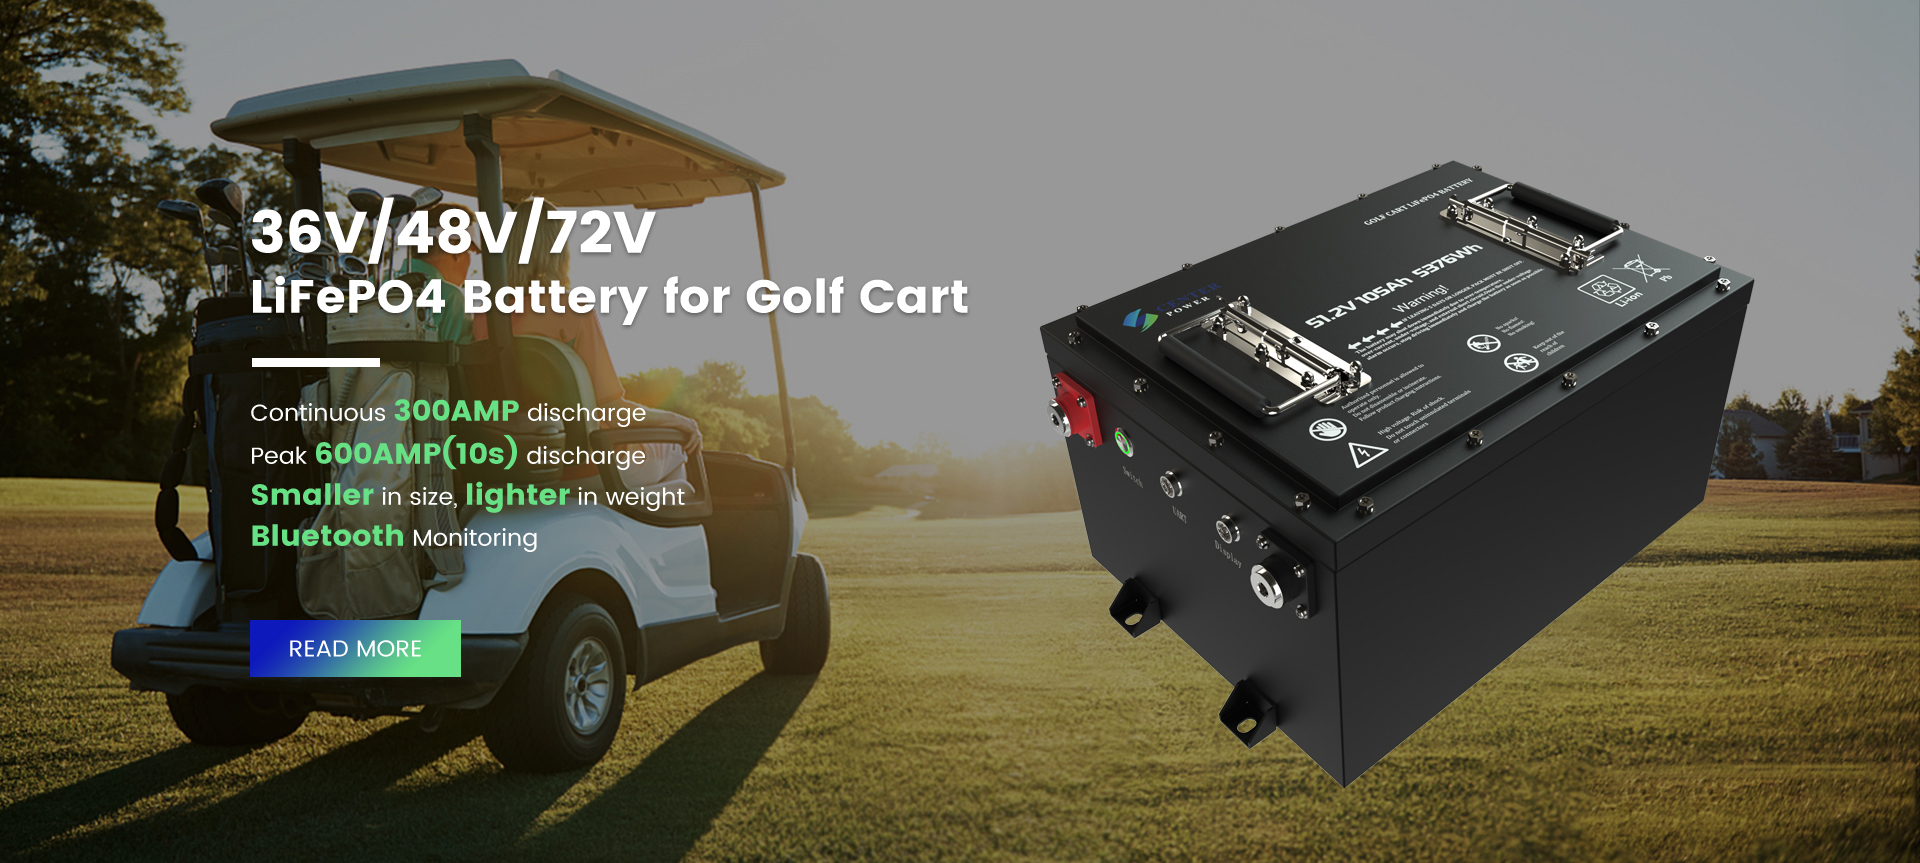 LifePo4 Battery for Golf Cart